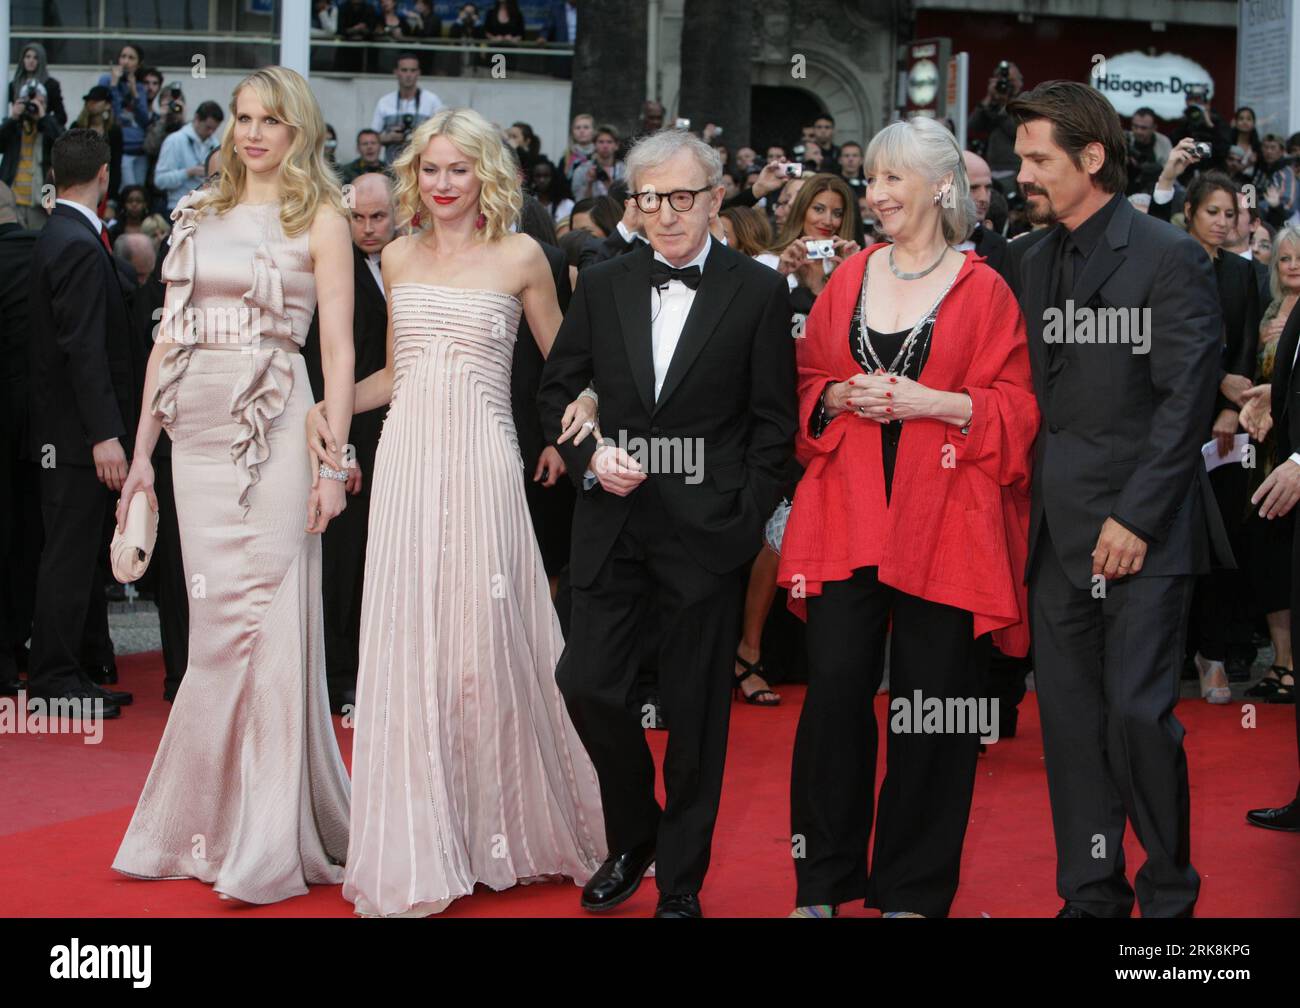 Bildnummer: 54050810  Datum: 15.05.2010  Copyright: imago/Xinhua (100516) -- CANNES, May 16, 2010 (Xinhua) -- British actress Lucy Punch, British-born Australian actress Naomi Watts, US director Woody Allen, British actress Gemma Jones and US actor Josh Brolin (from L to R) arrive for the screening of You Will Meet a Tall Dark Stranger presented out of competition at the 63rd Cannes Film Festival in Cannes, France, May 15, 2010. (Xinhua/Xiao He) (yc) (1)FRANCE-CANNES-WOODY ALLEN PUBLICATIONxNOTxINxCHN People Kultur Entertainment Film 63. Internationale Filmfestspiele Cannes Filmfestival Premie Stock Photo